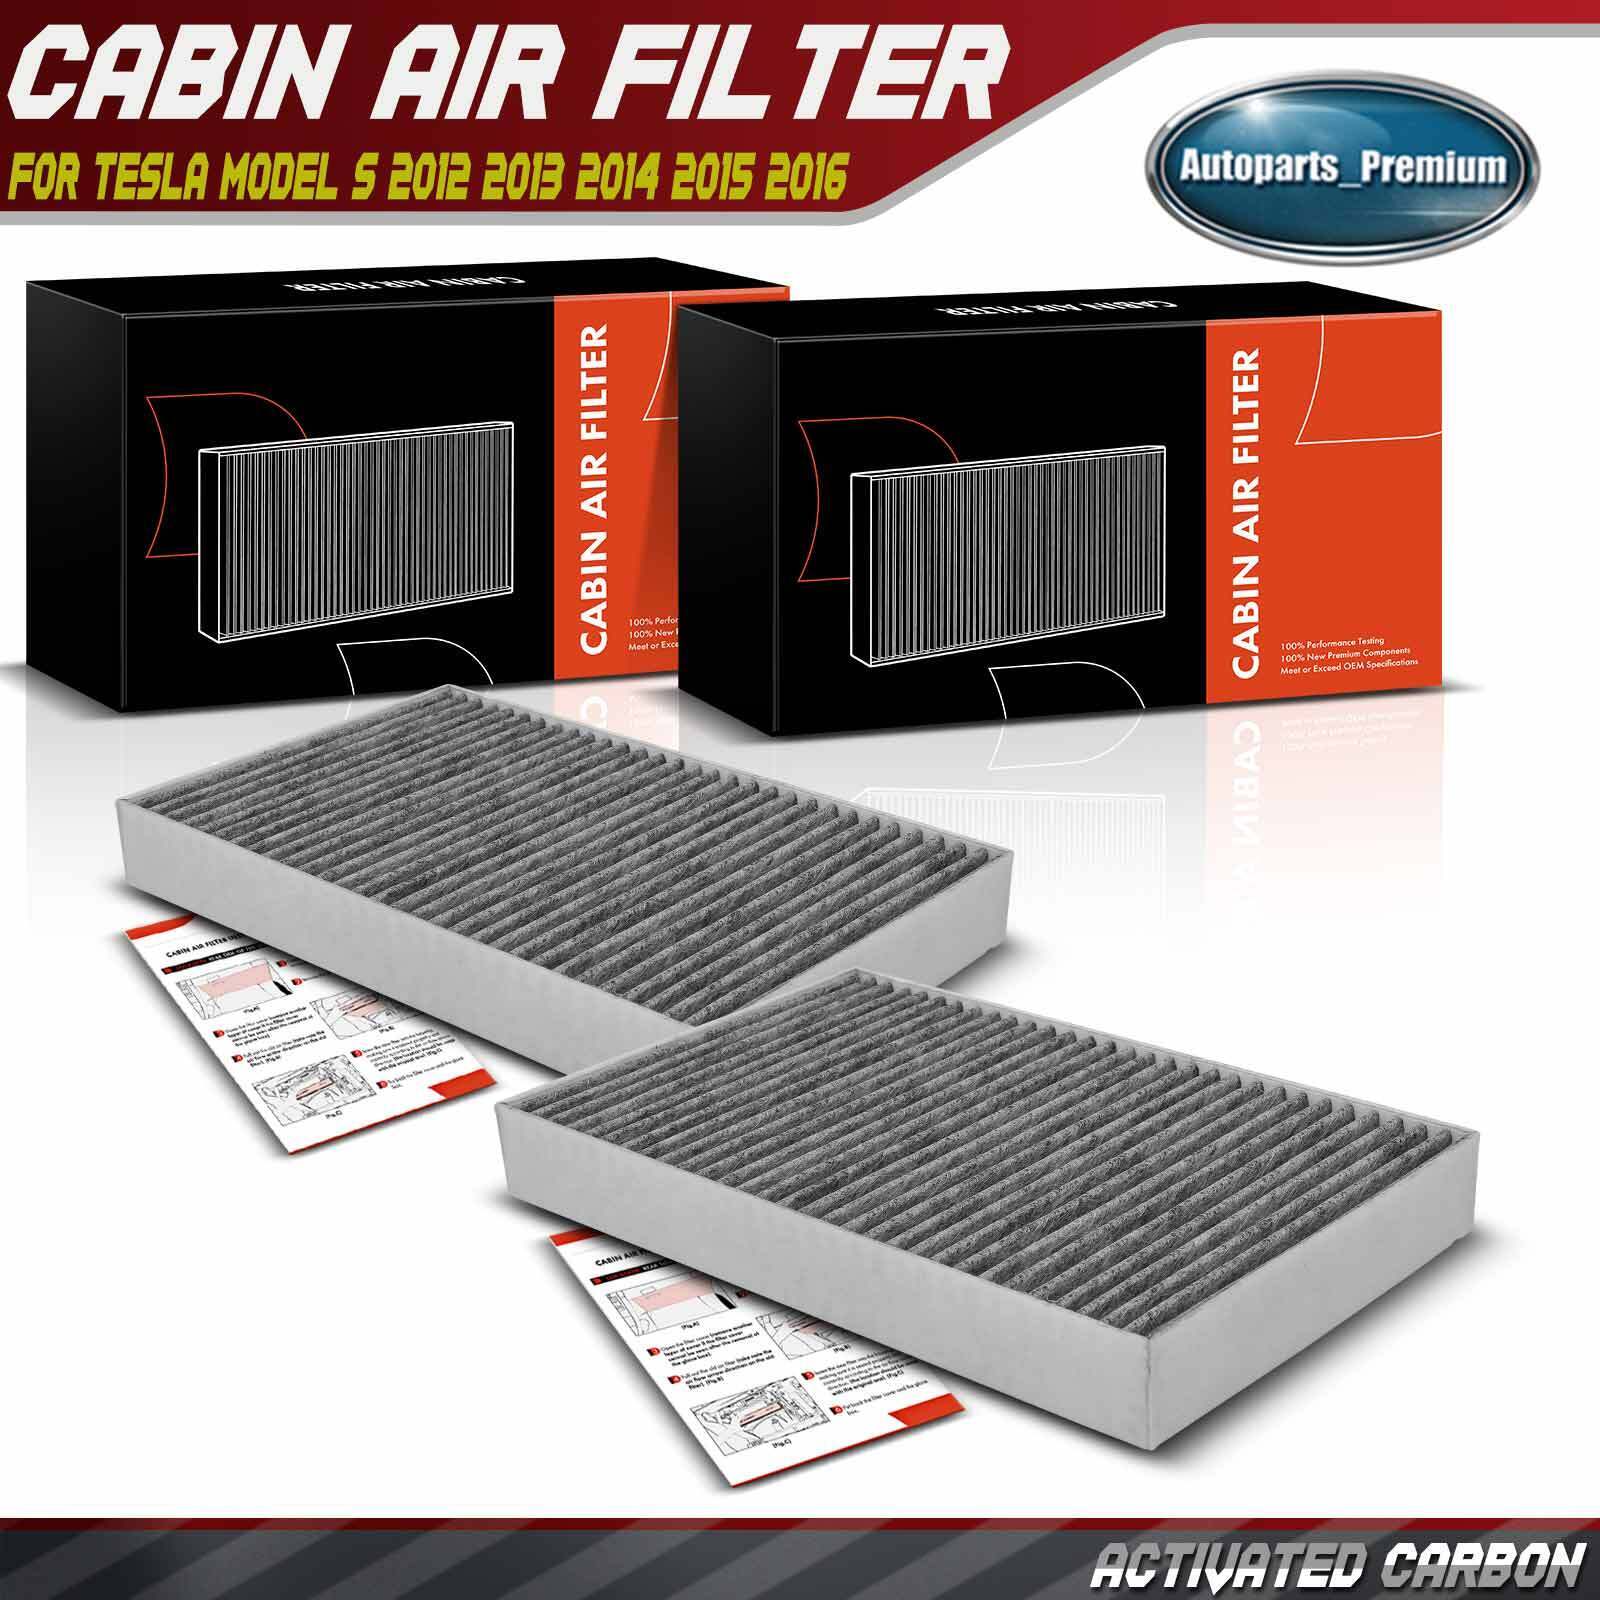 2x Activated Carbon Cabin Air Filter for Tesla Model S 2012 2013 2014 2015 2016